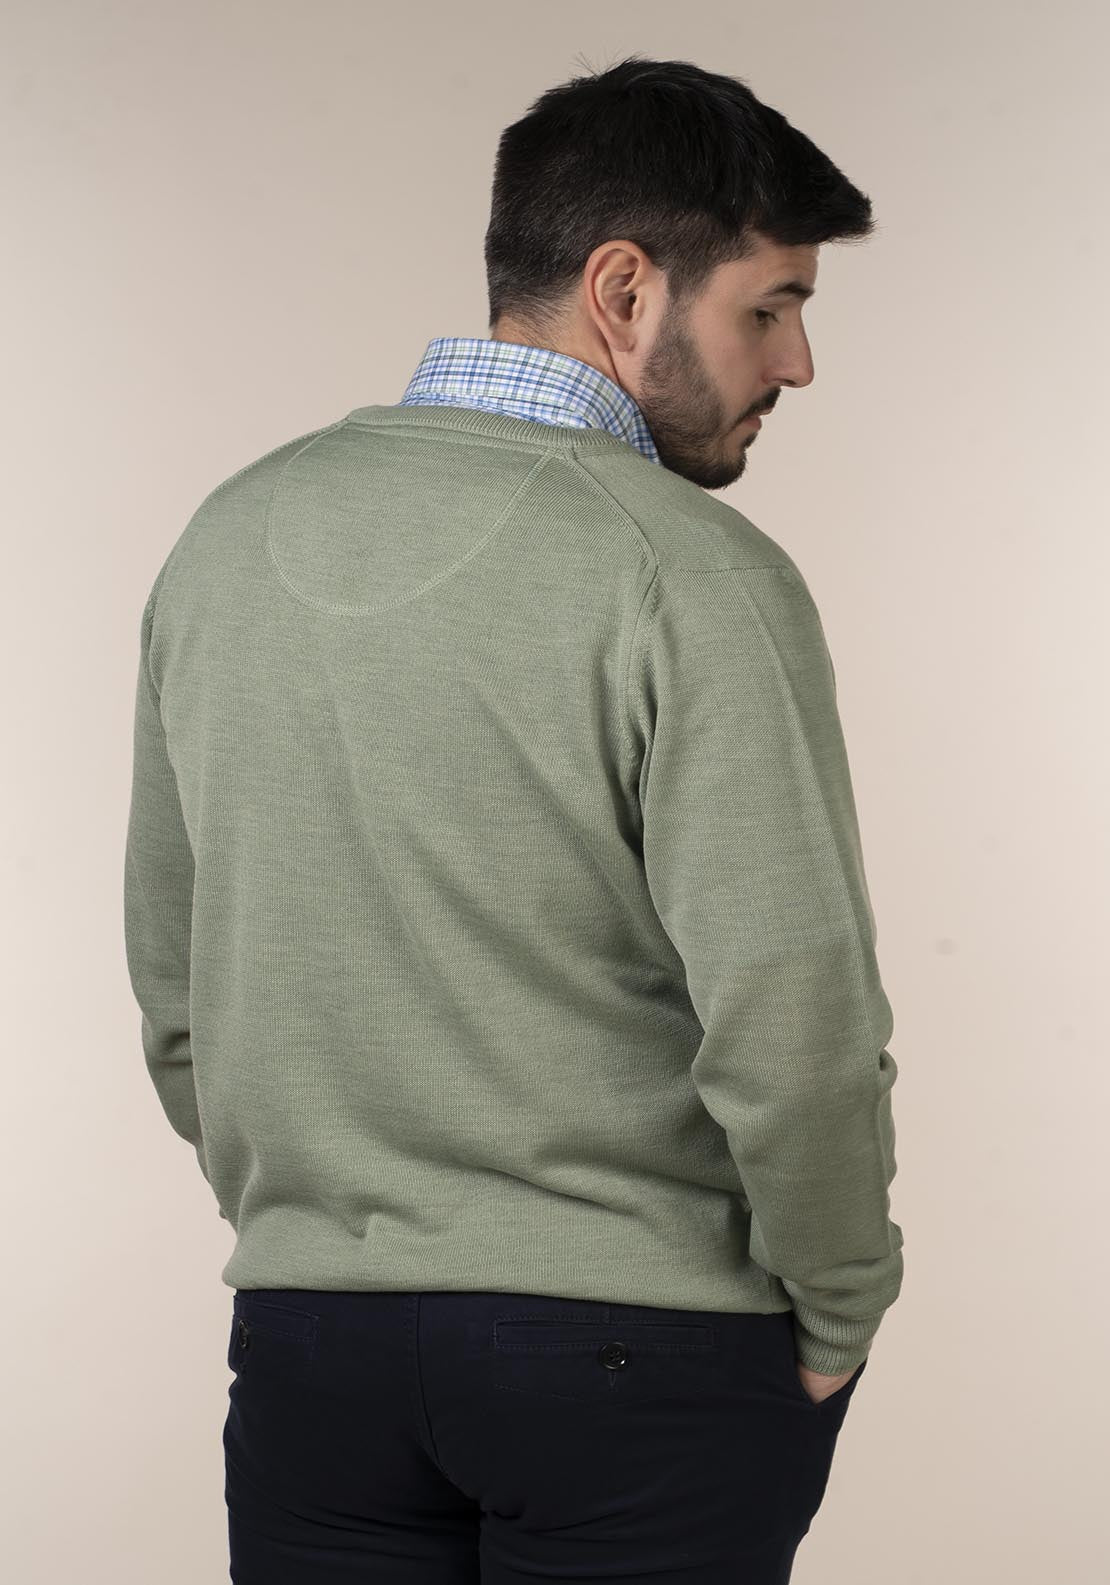 Yeats Mens 100% Cotton V-Neck Jumper 5 Shaws Department Stores